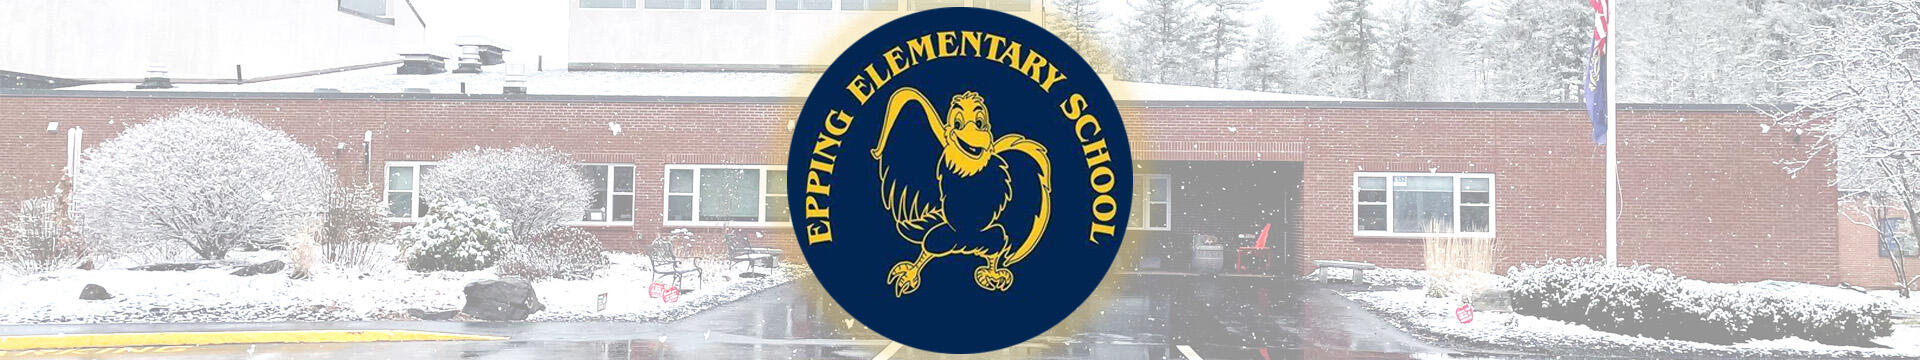 image of school and eagle logo